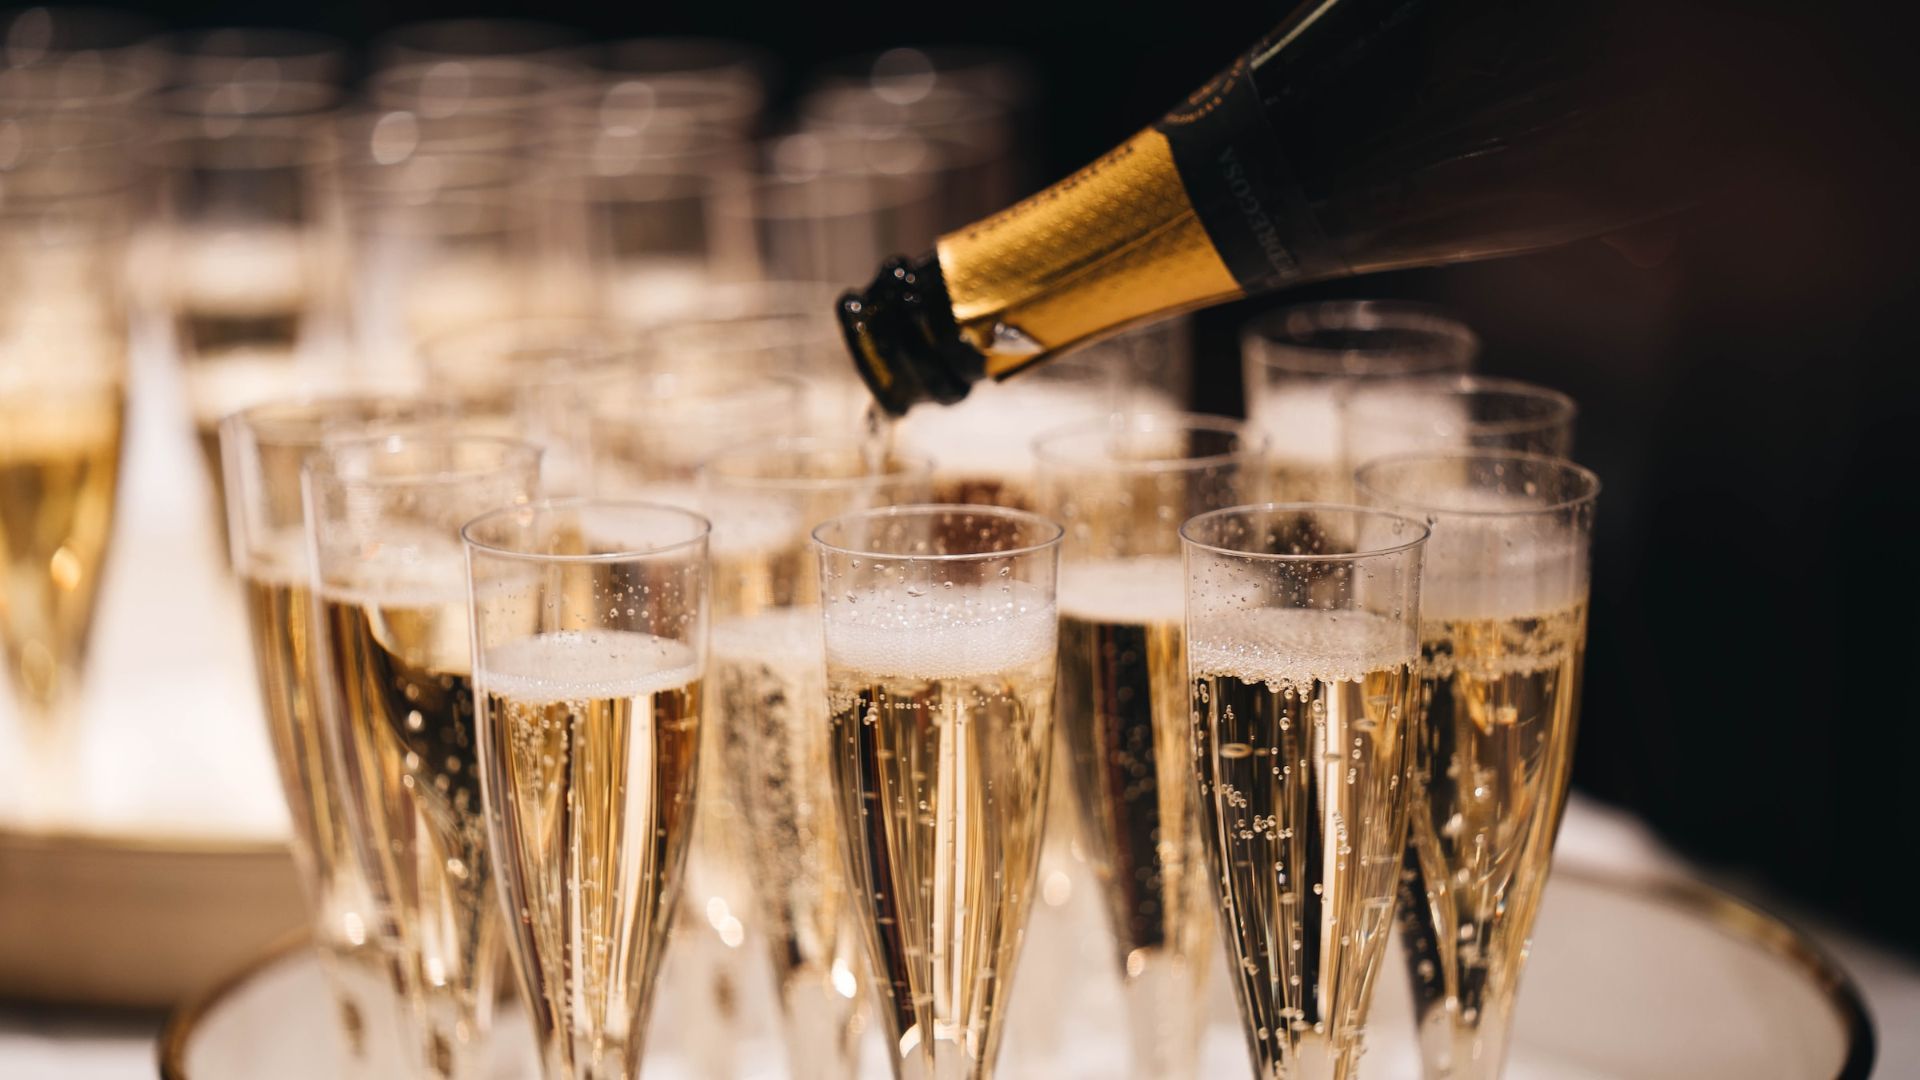 Best Expensive Champagne - Fancy Champagnes for New Years